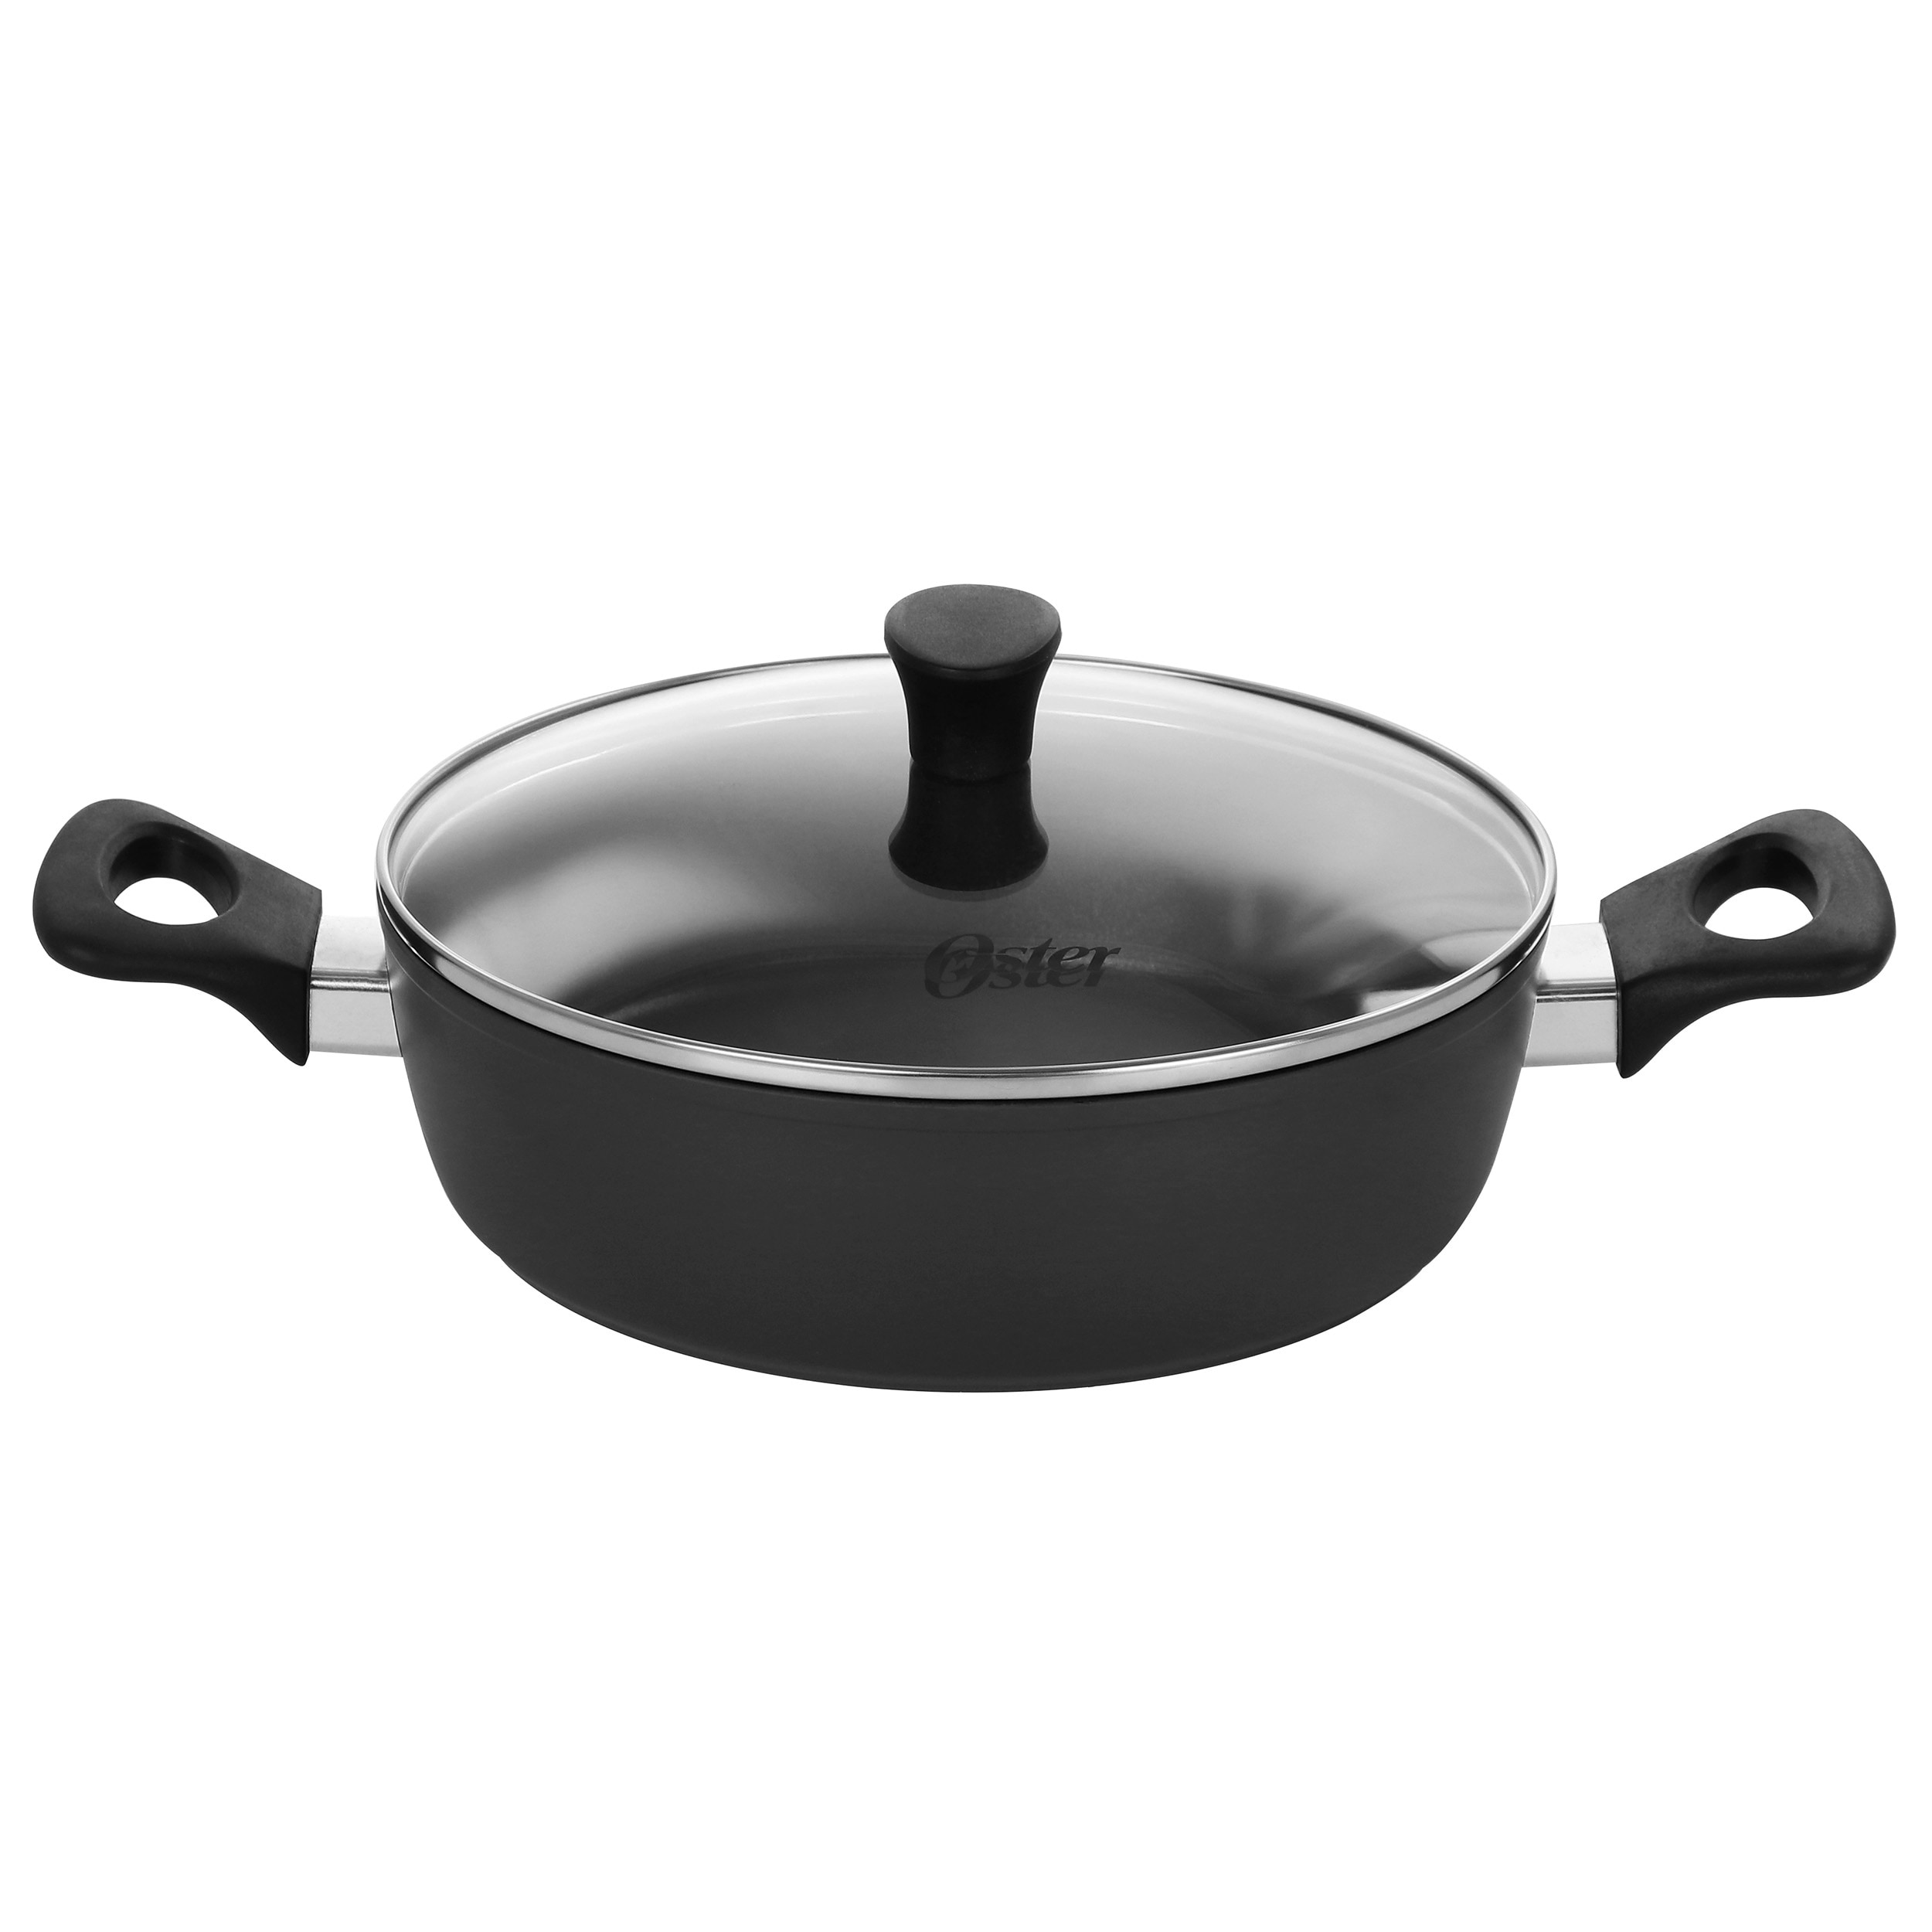 https://ak1.ostkcdn.com/images/products/is/images/direct/9df5baed992a624b66e44ab7750dd2d49fdbaf00/Oster-3-Quart-Non-Stick-Aluminum-Everyday-Pan-with-Lid.jpg